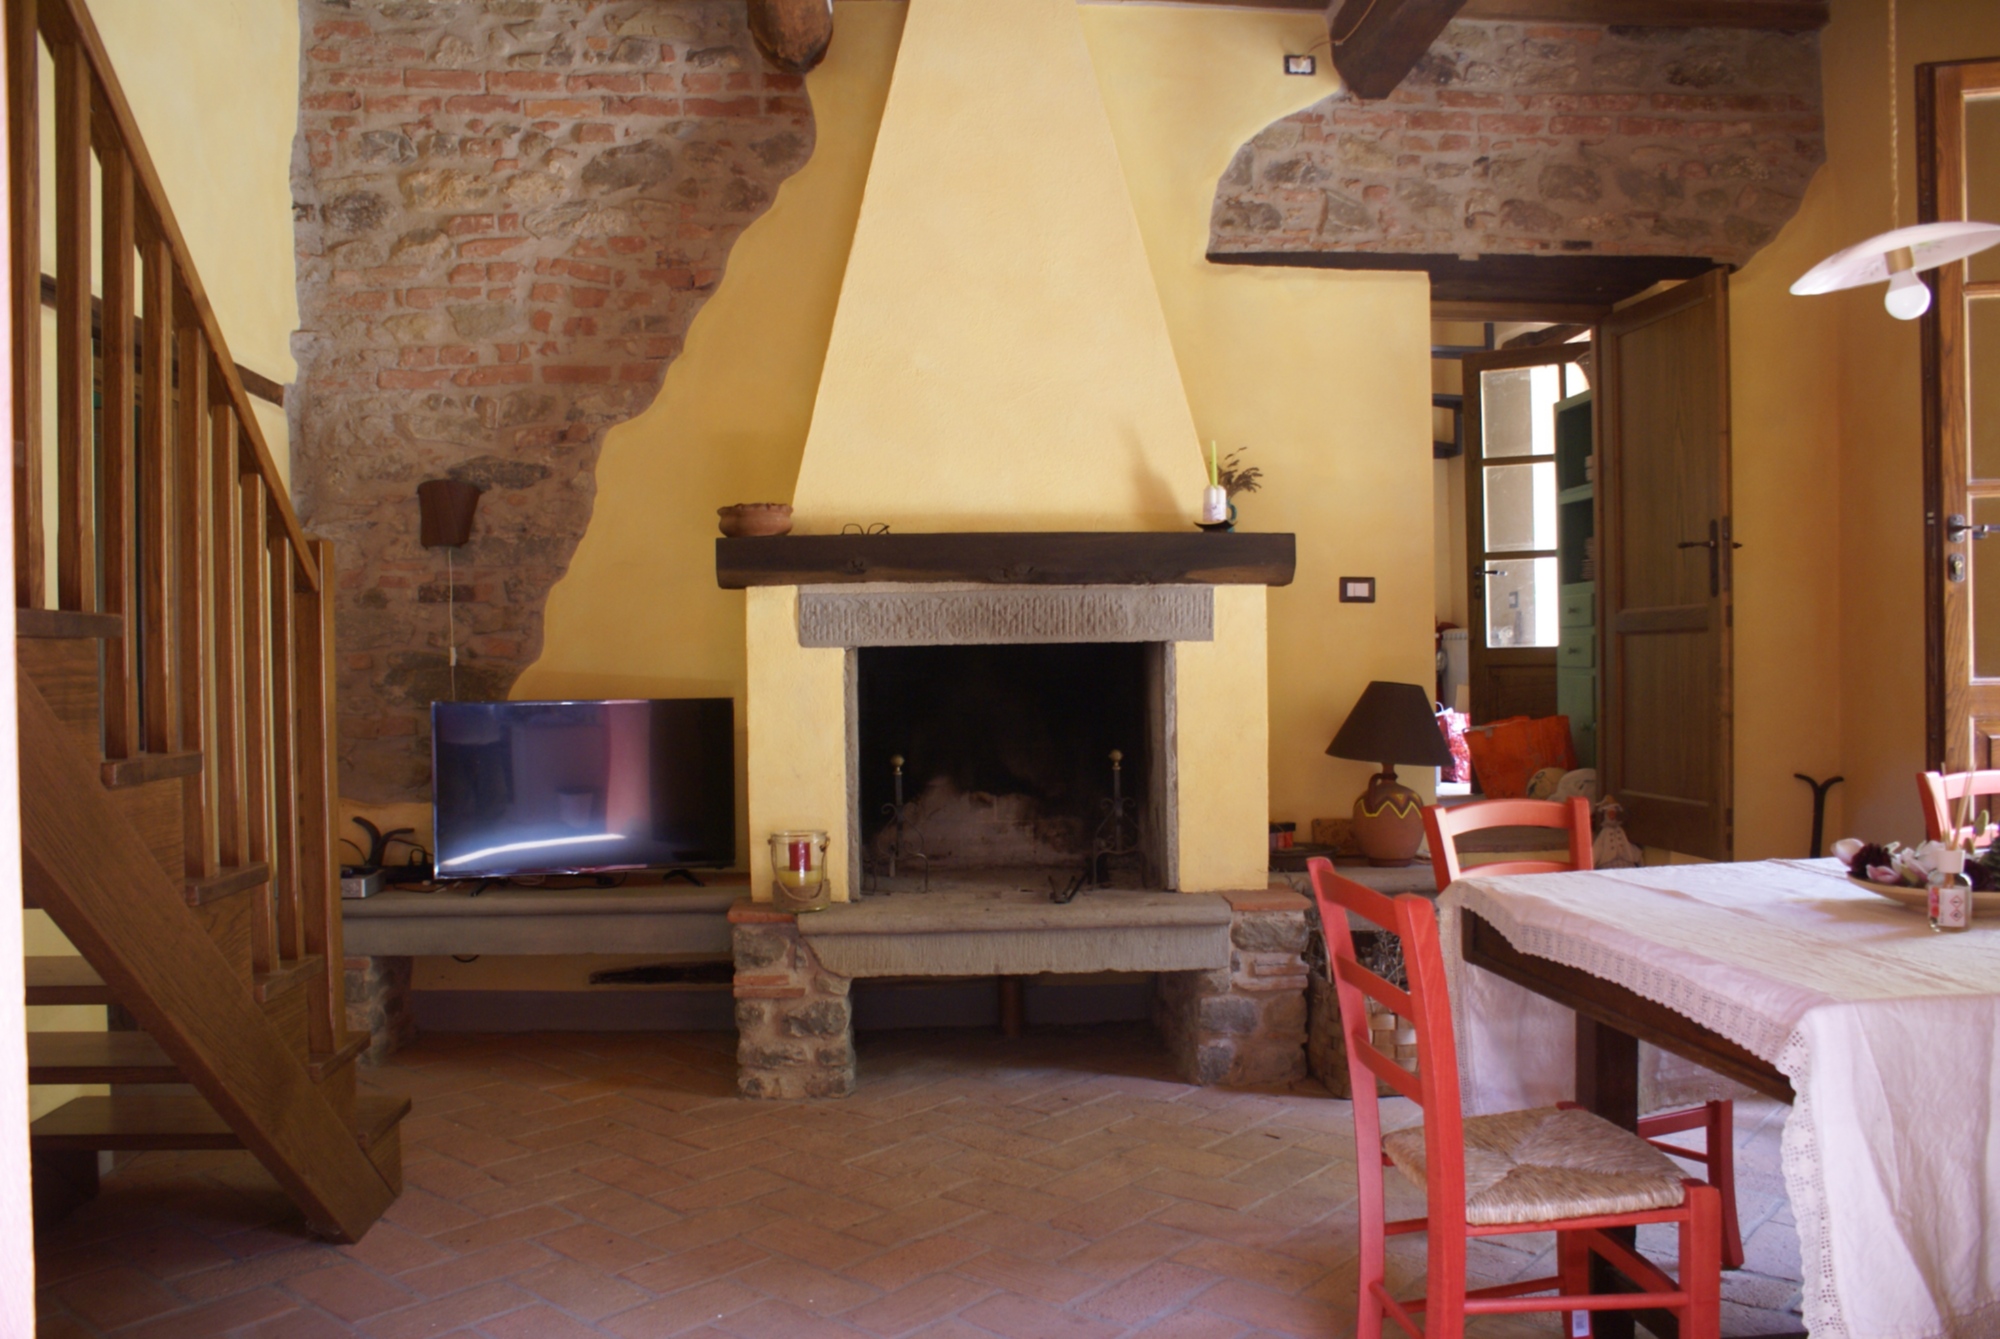 Stay at Case Beppino Barga, recently renovated chalets in the Serchio Valley